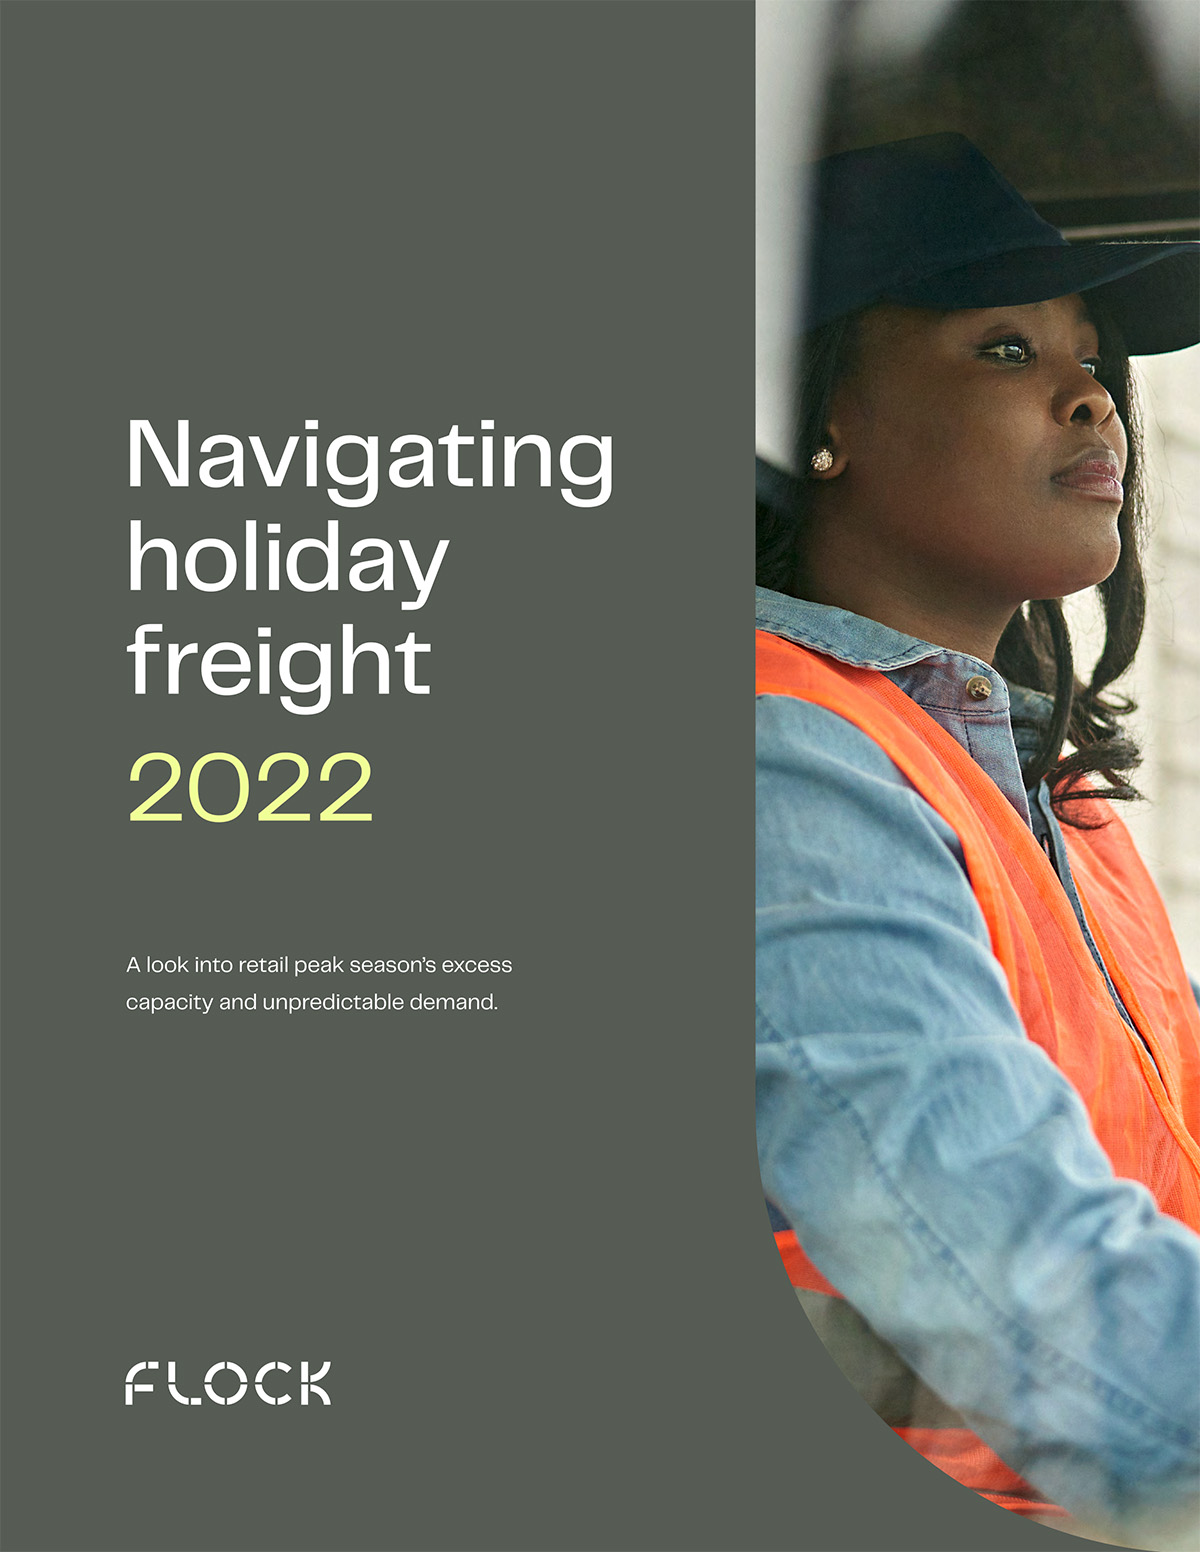 Flock freight navigating holiday freight whitepaper cover